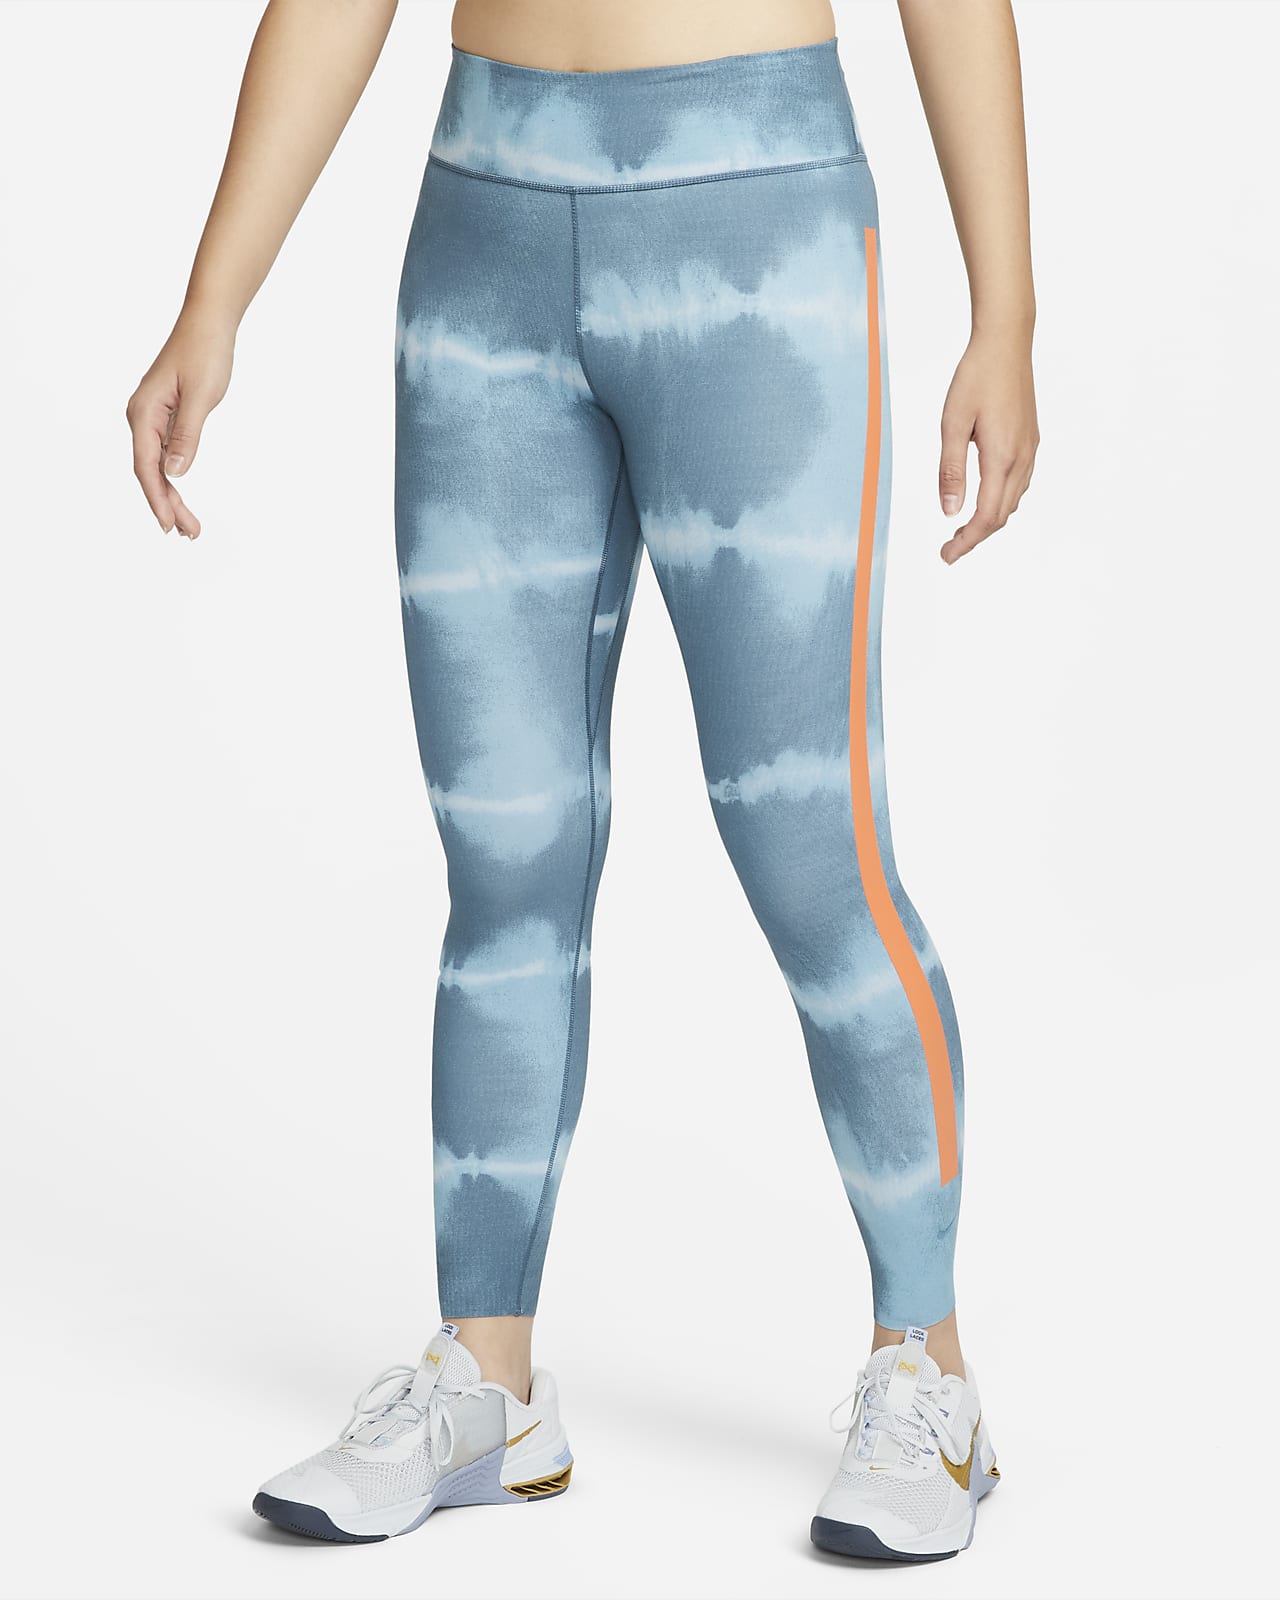 Nike One Luxe Women's Mid-Rise Printed Training Leggings